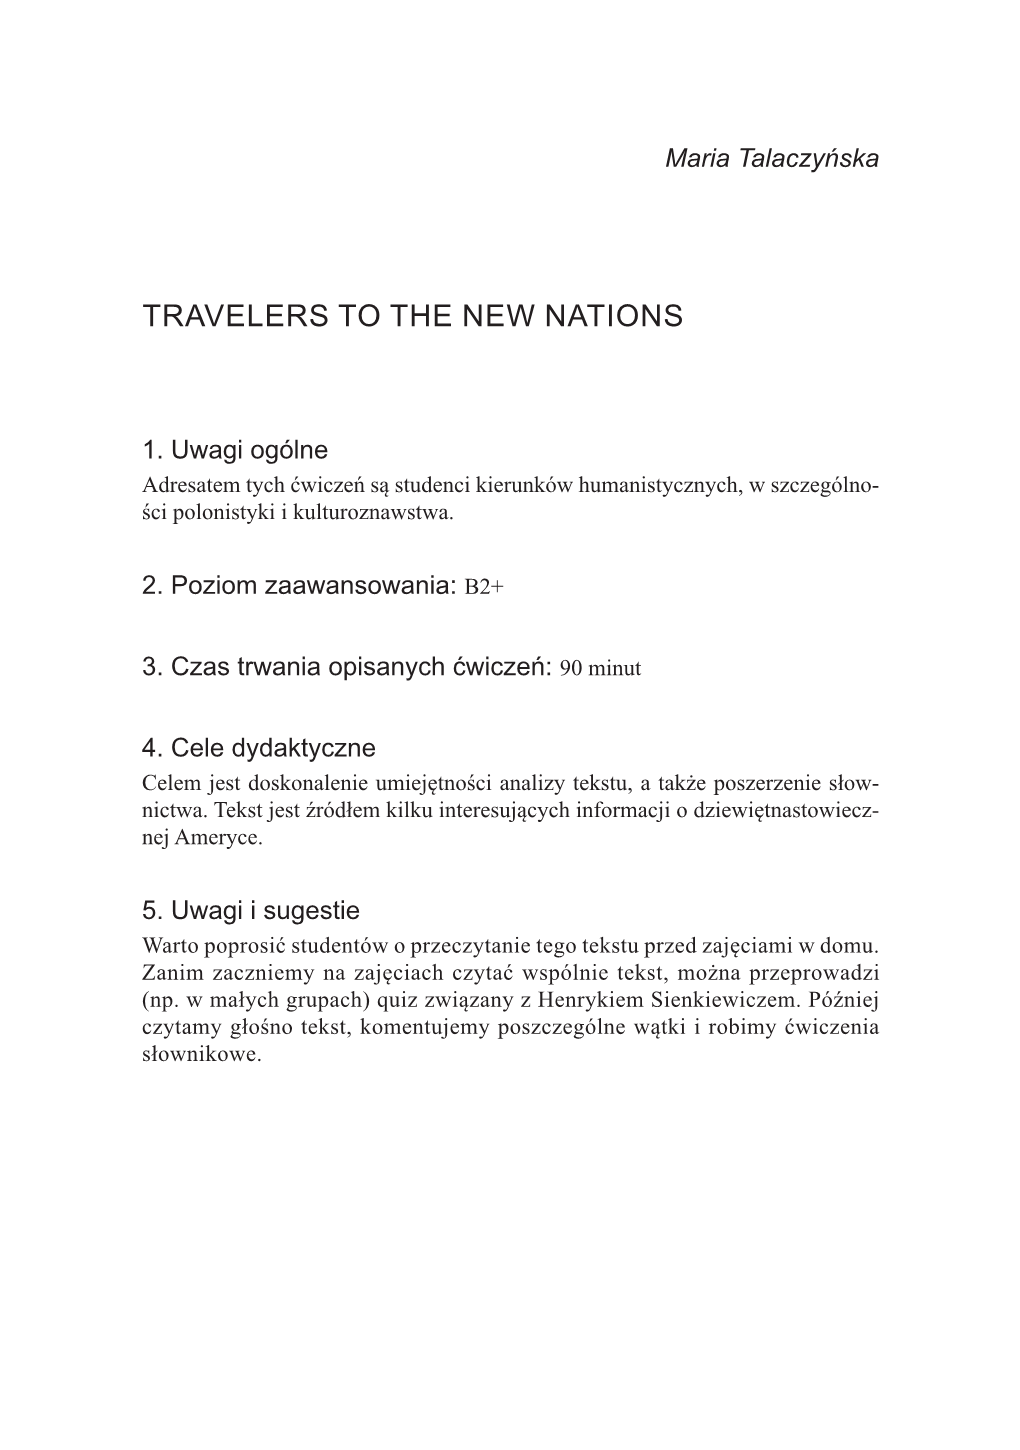 Travelers to the New Nations